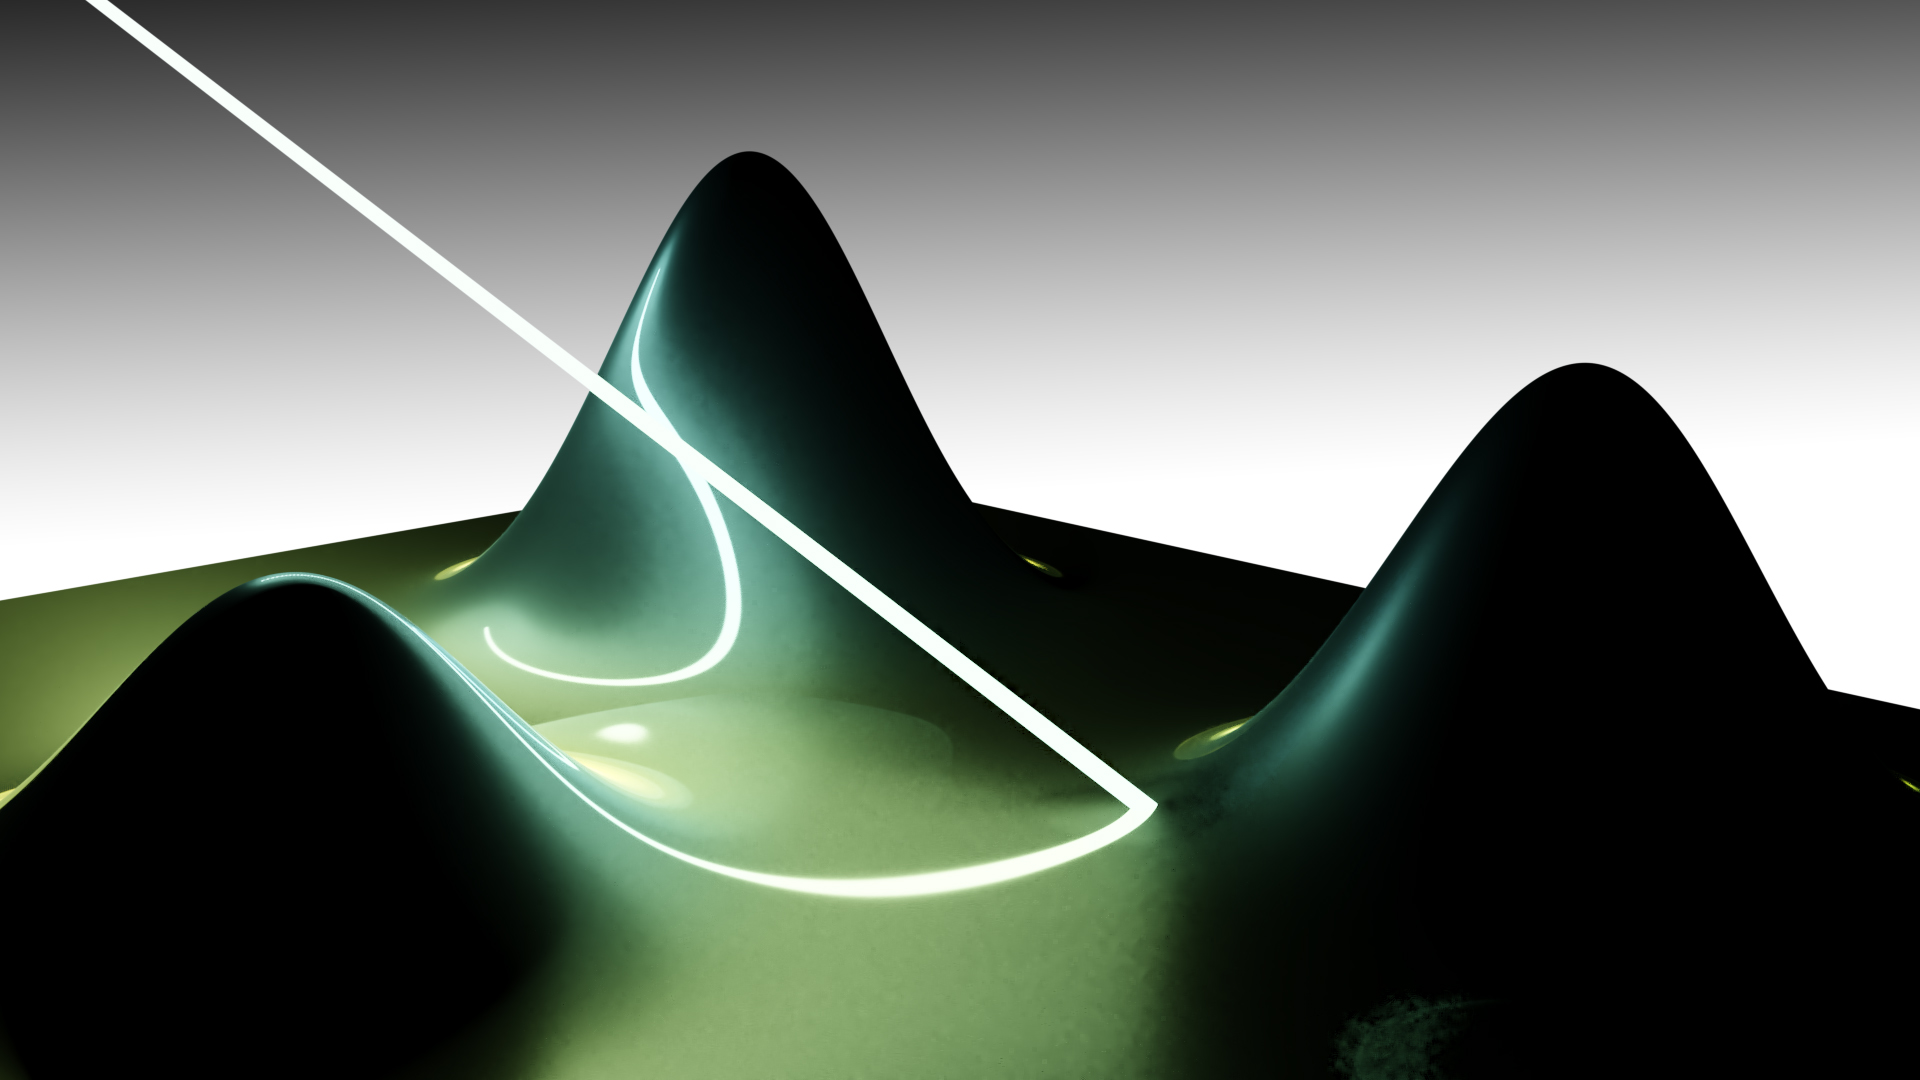 A 3D “landscape” with three Gaussian peaks and a beam of white light.